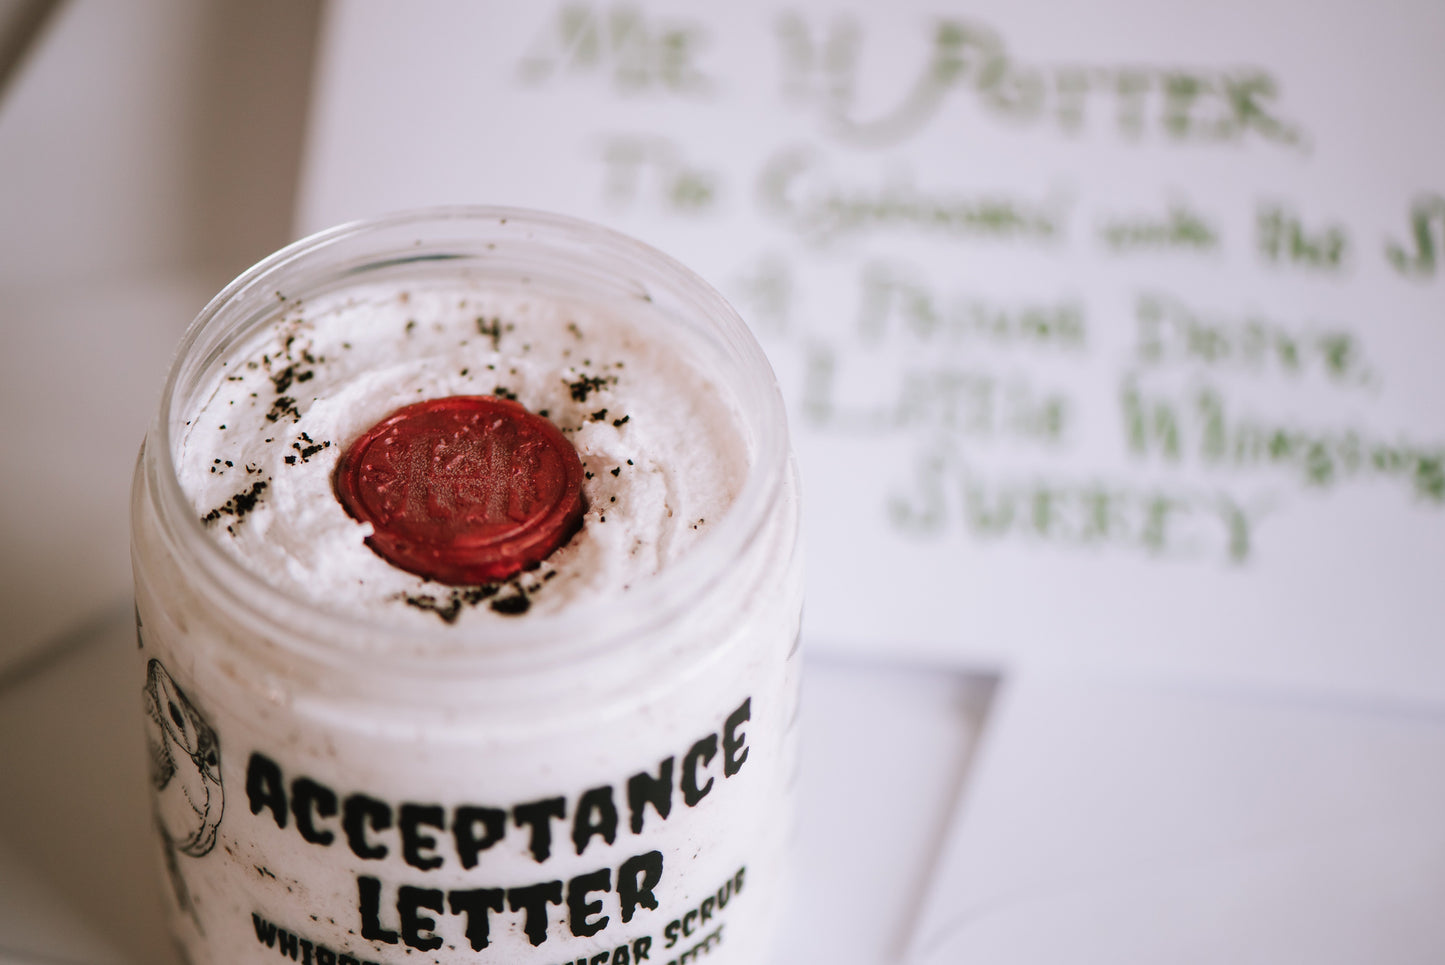 Acceptance letter whipped soap scrub